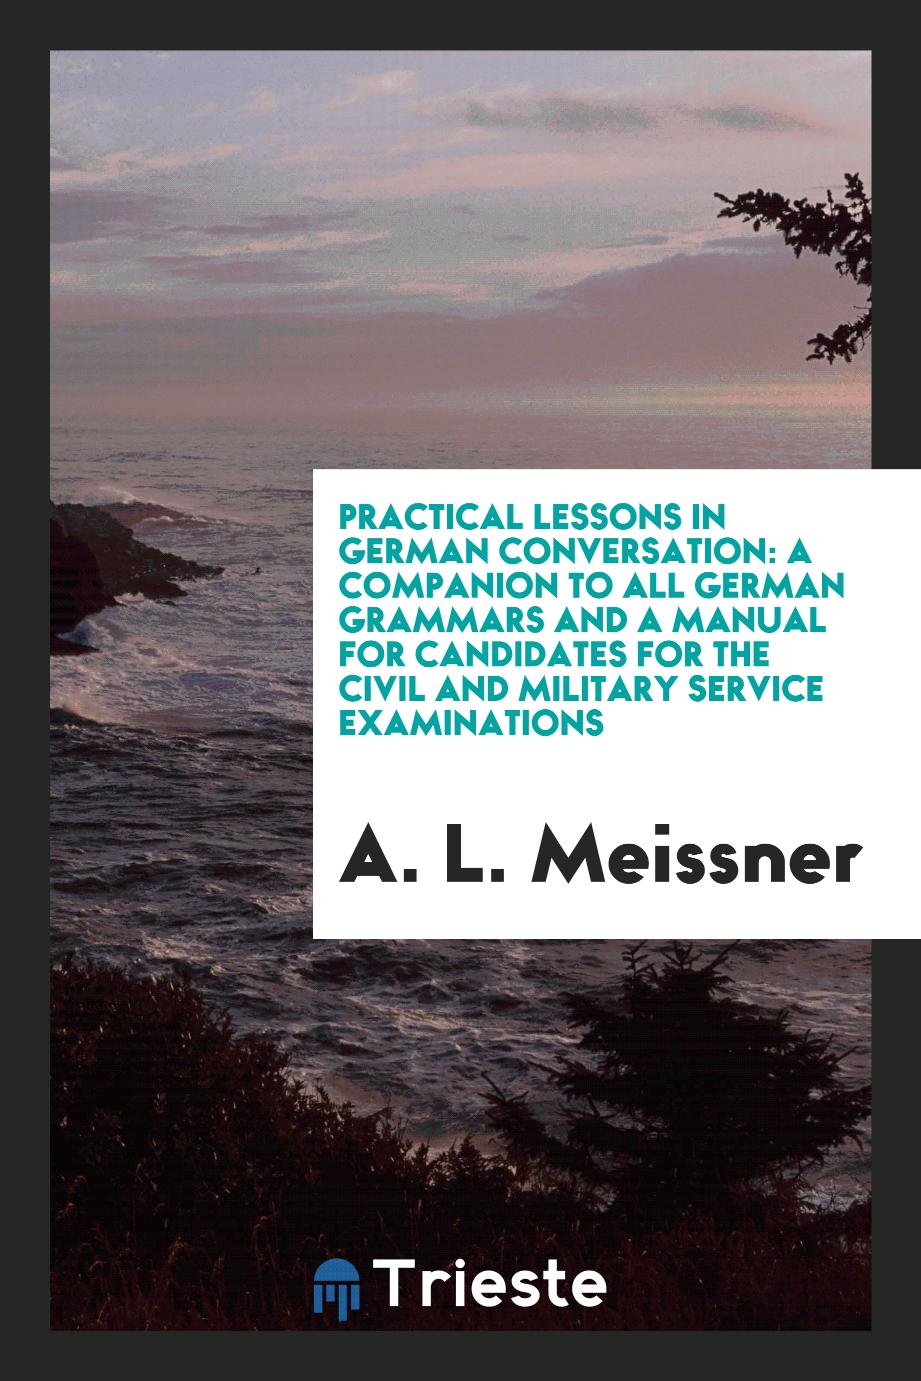 Practical Lessons in German Conversation: A Companion to All German Grammars and a Manual for Candidates for the Civil and Military Service Examinations